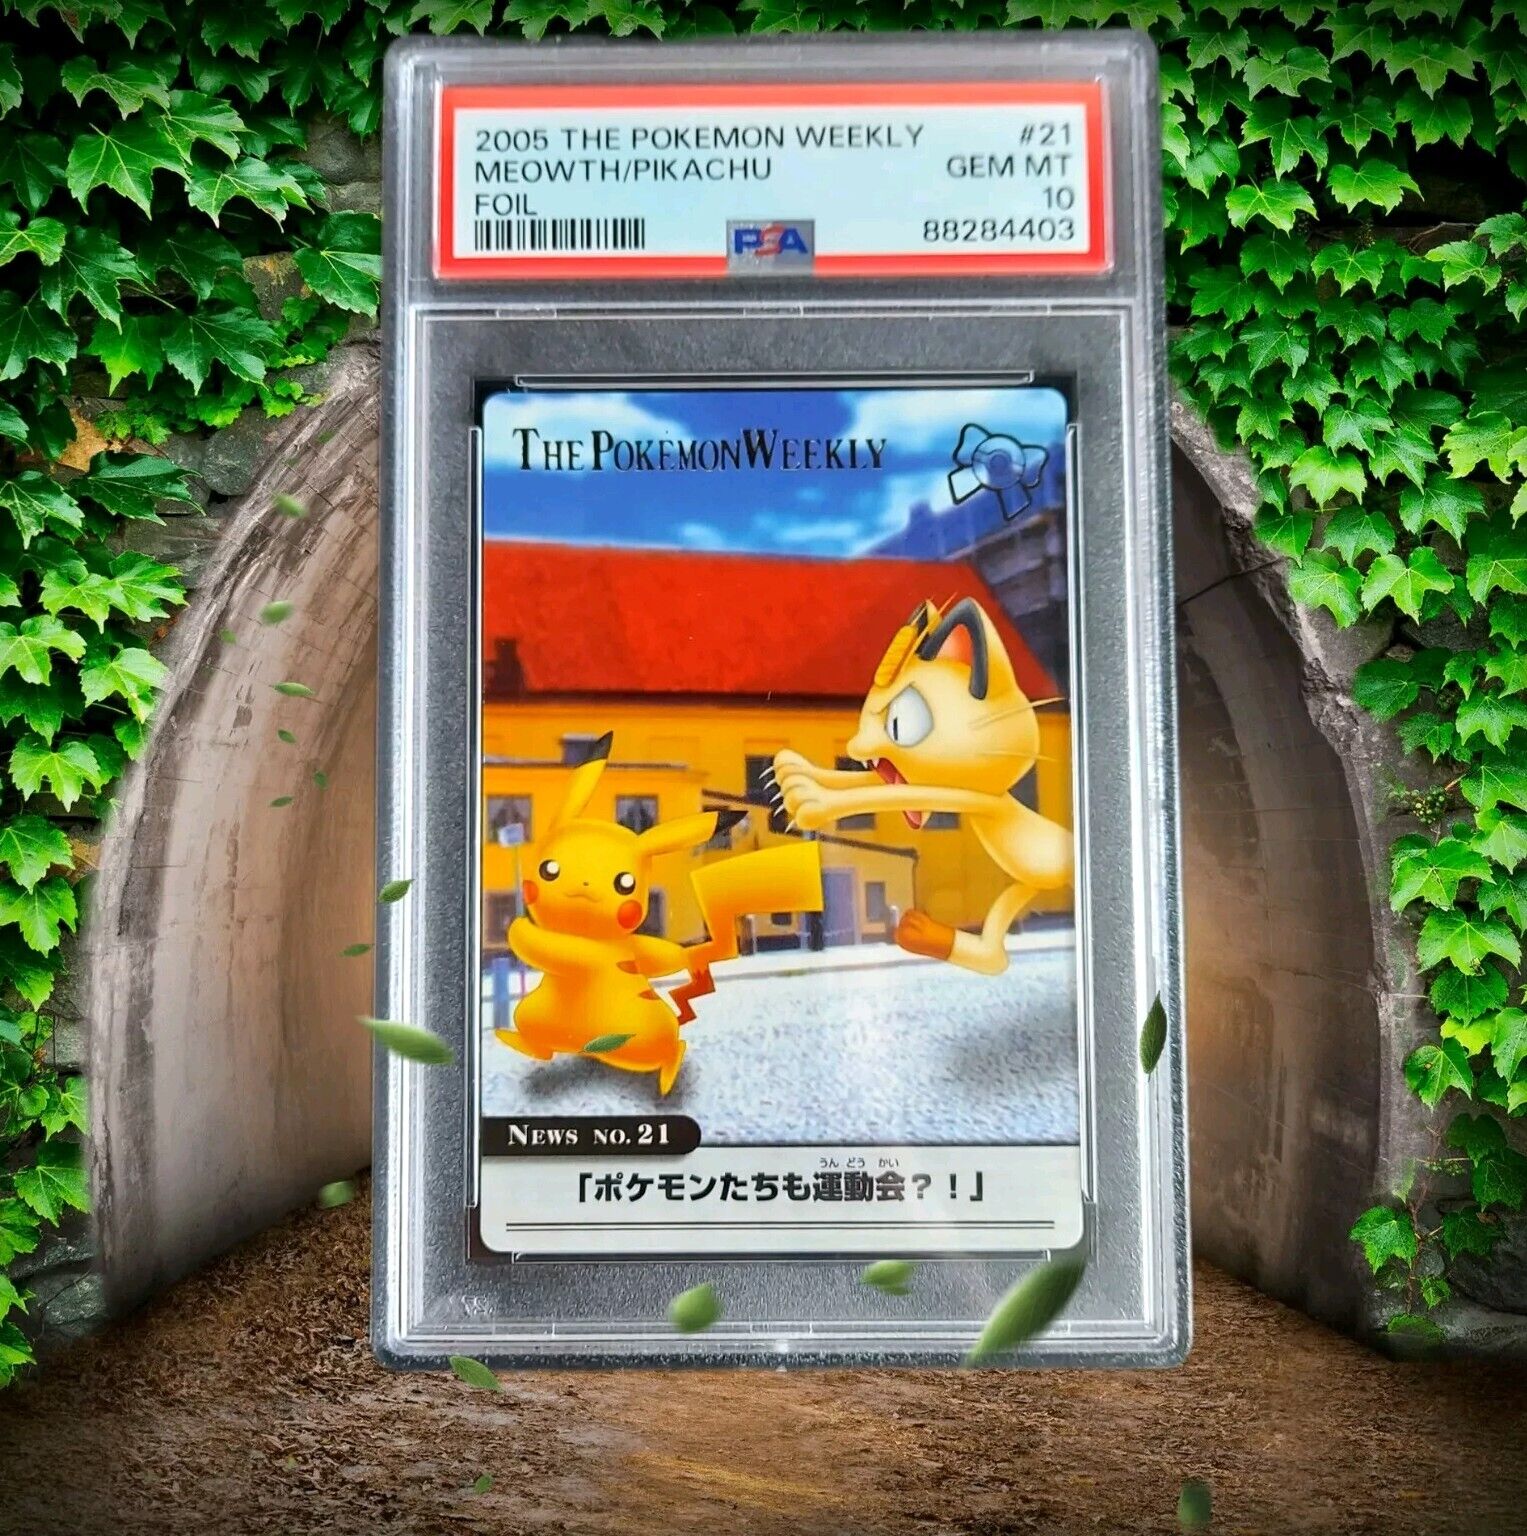 POP 5 2005 PSA 10 - Pikachu & Meowth 21 Gold Foil Stamp The Pokemon Weekly Card